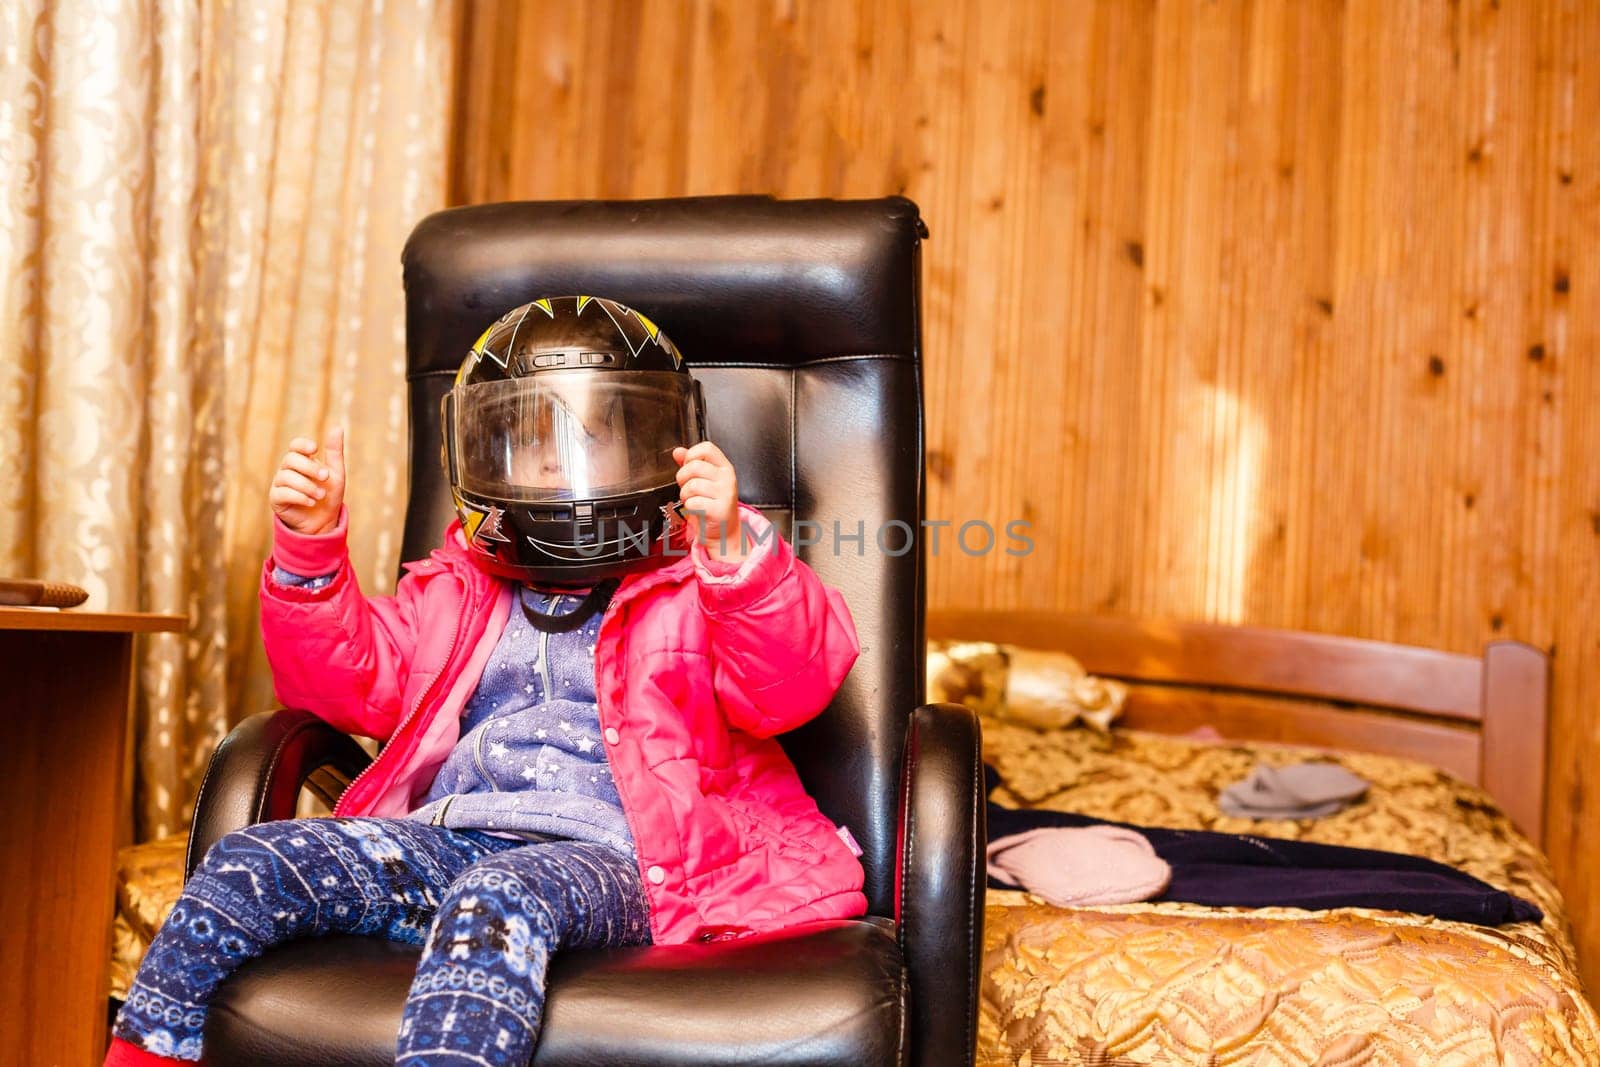 little girl in a motorcycle helmet in a chair at home by Andelov13